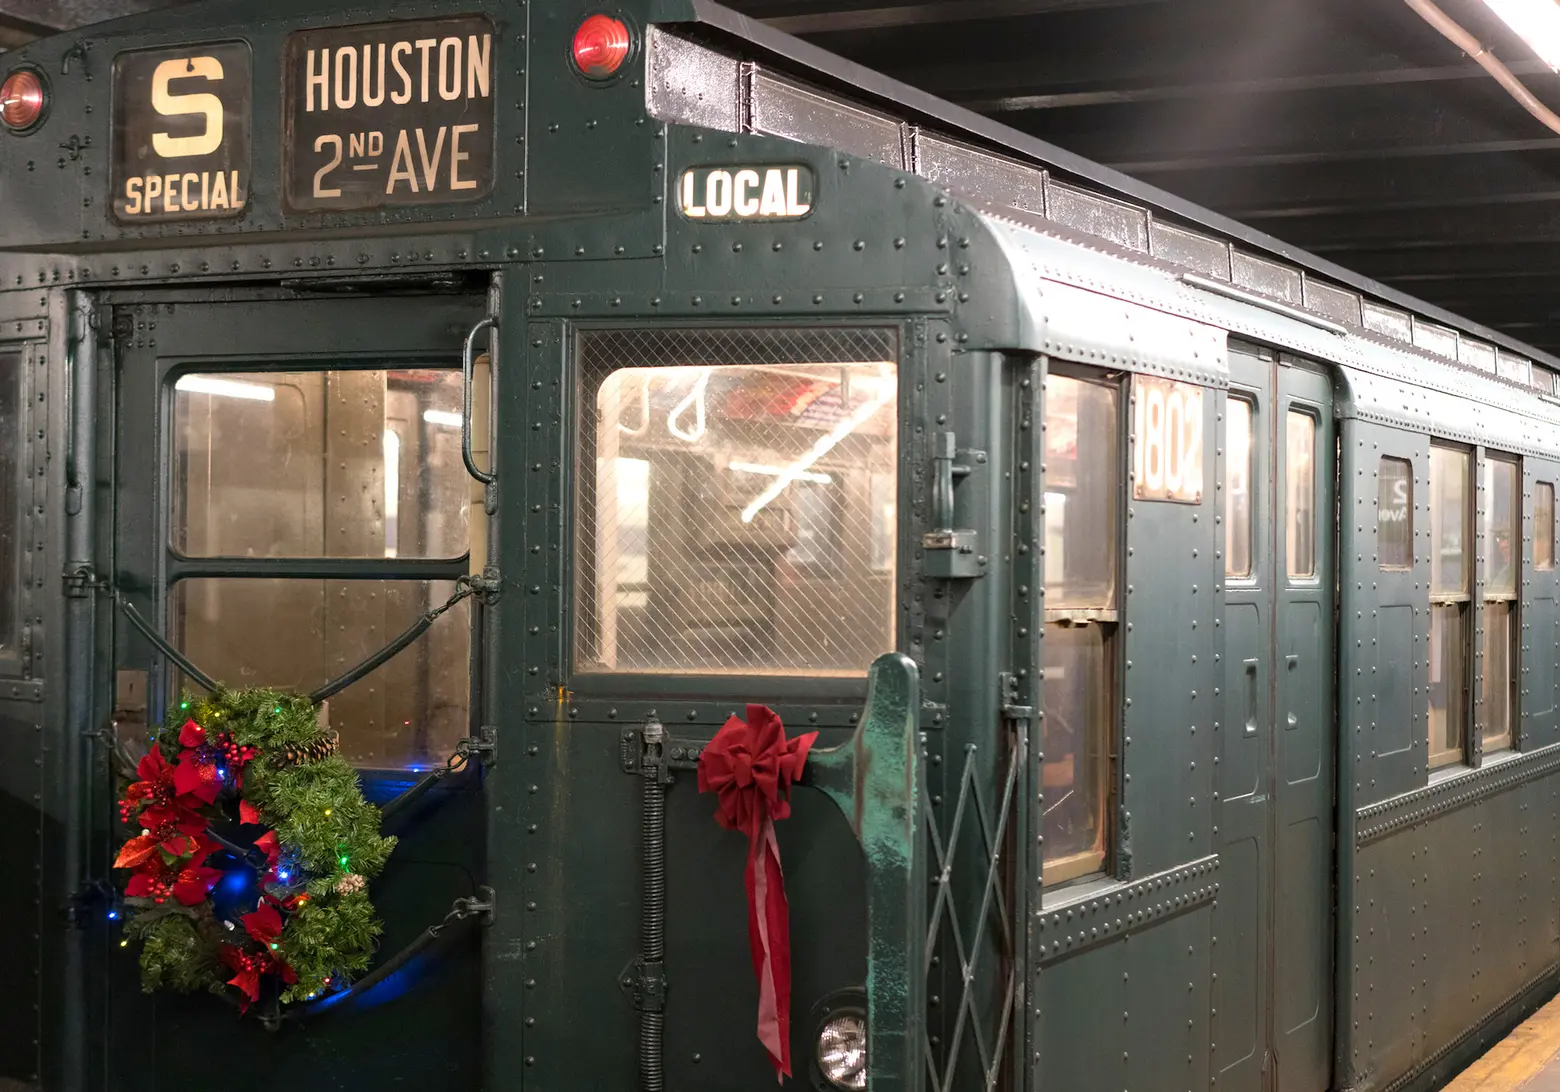 Ride back in time on vintage NYC trains and buses this holiday season